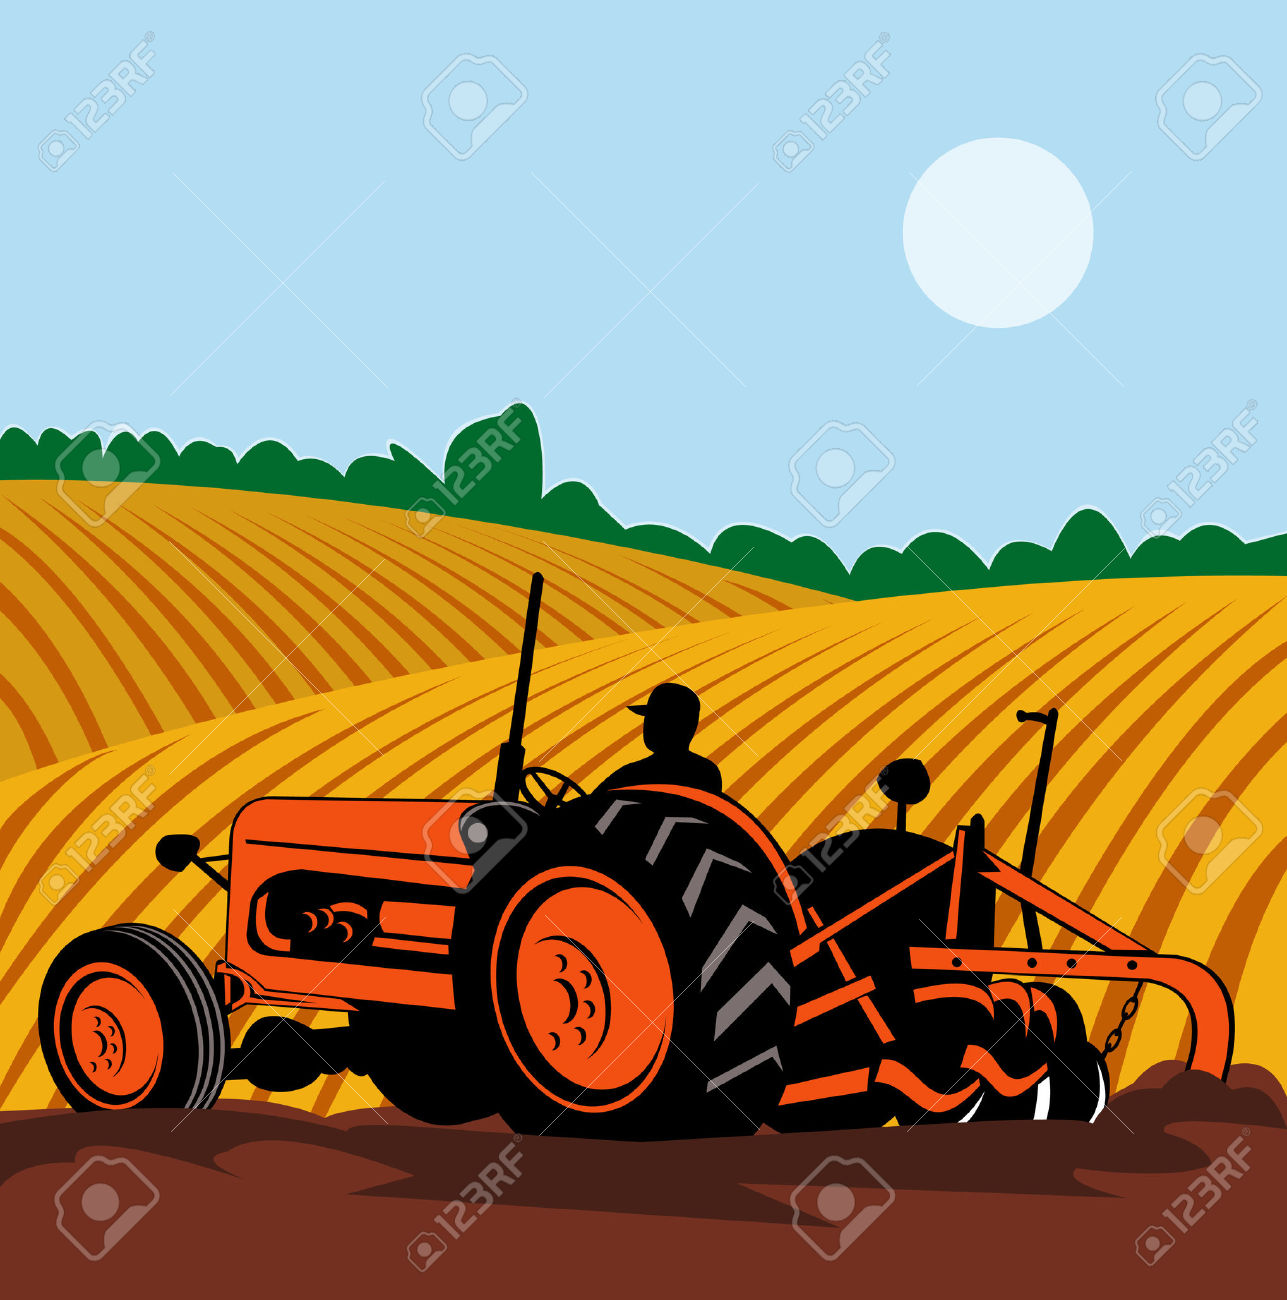 Agriculture field clipart.